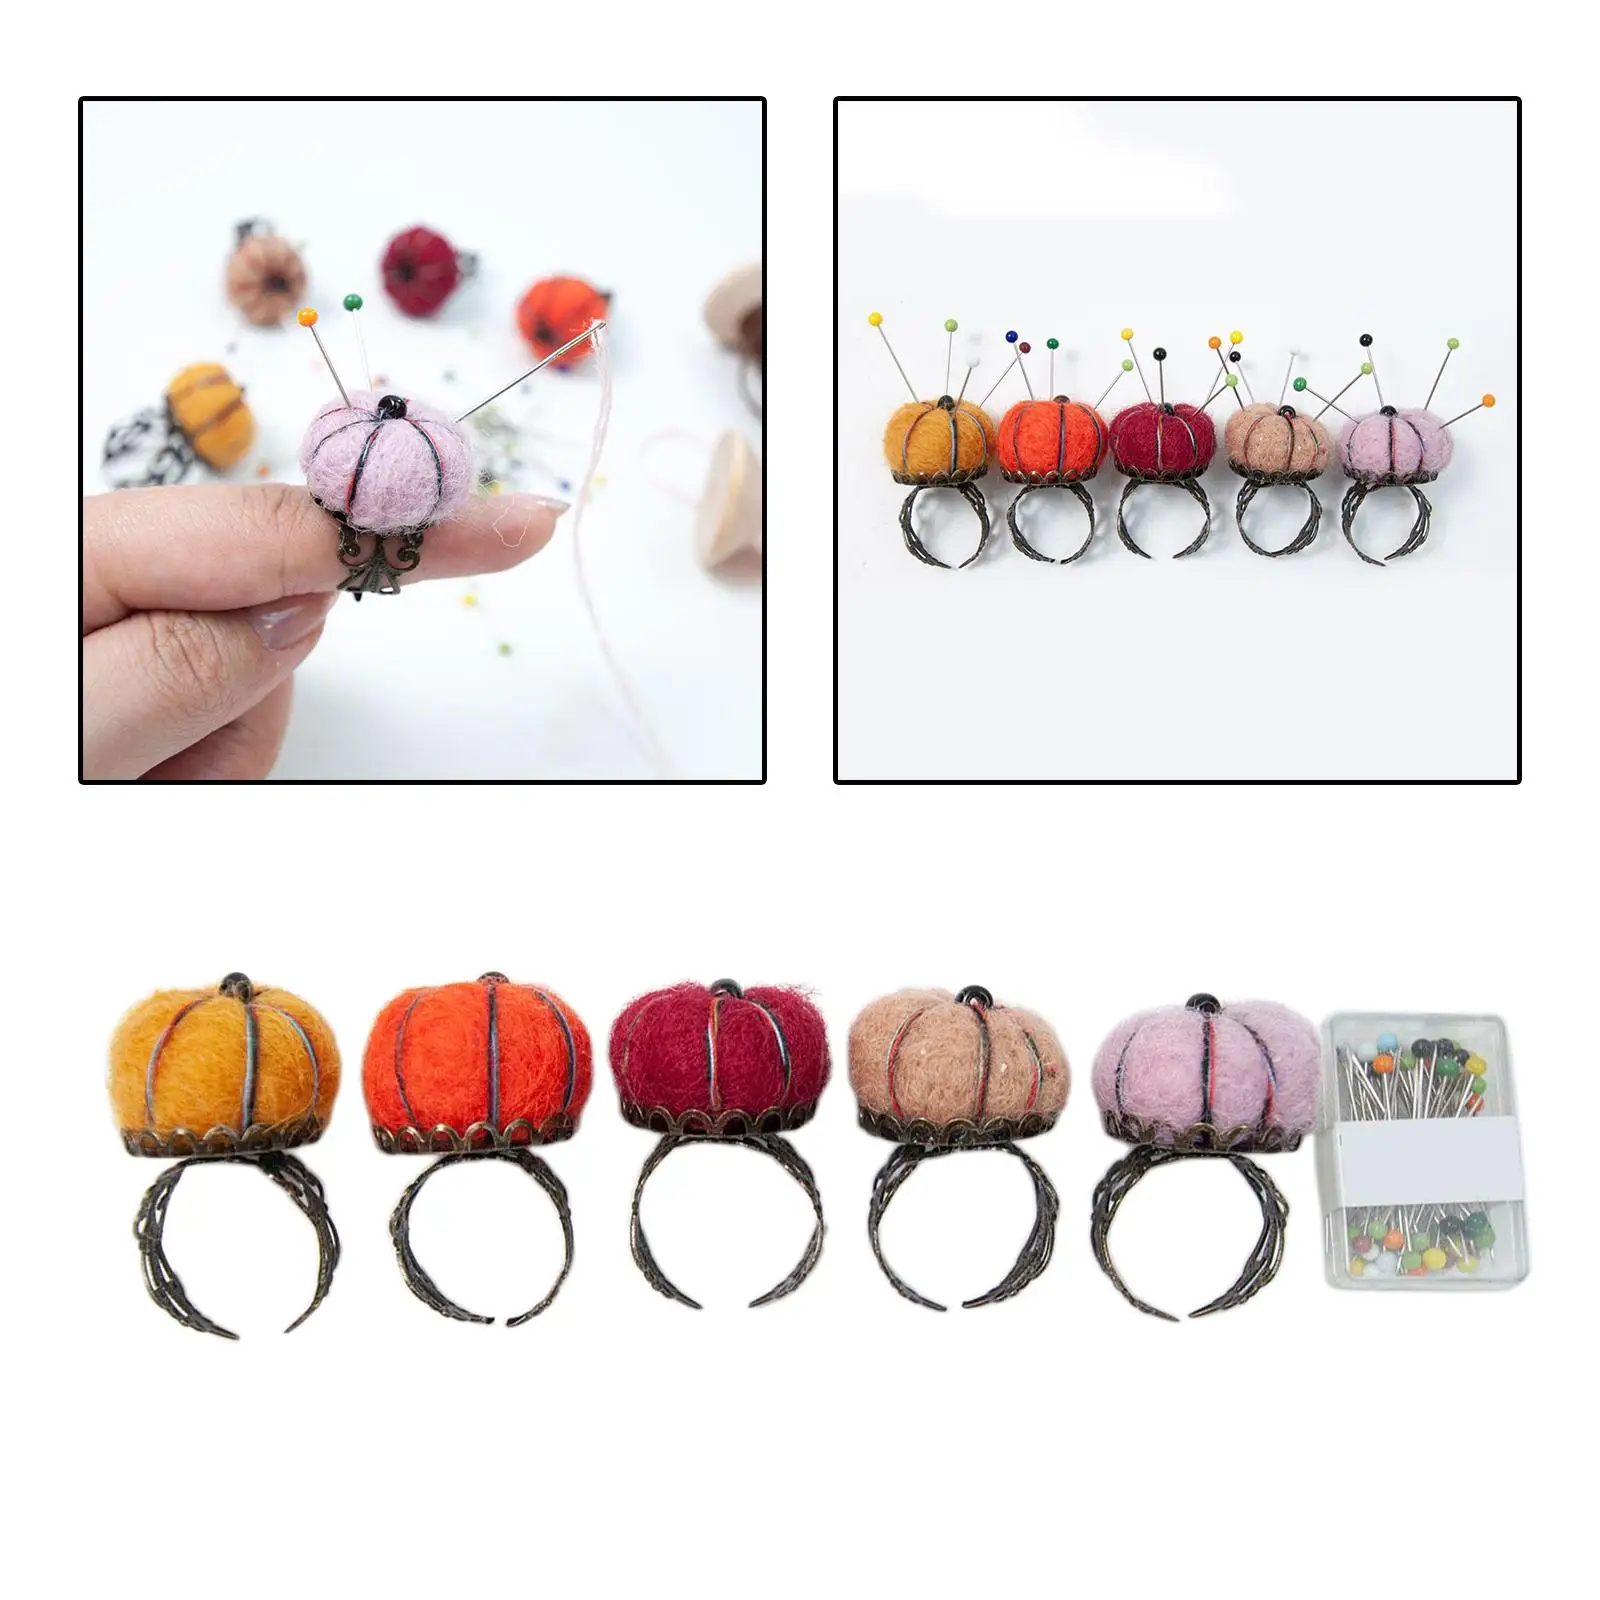 5Pcs Felt Pincushions DIY Crafts Needle Holder for Quilting Sewing Accessory